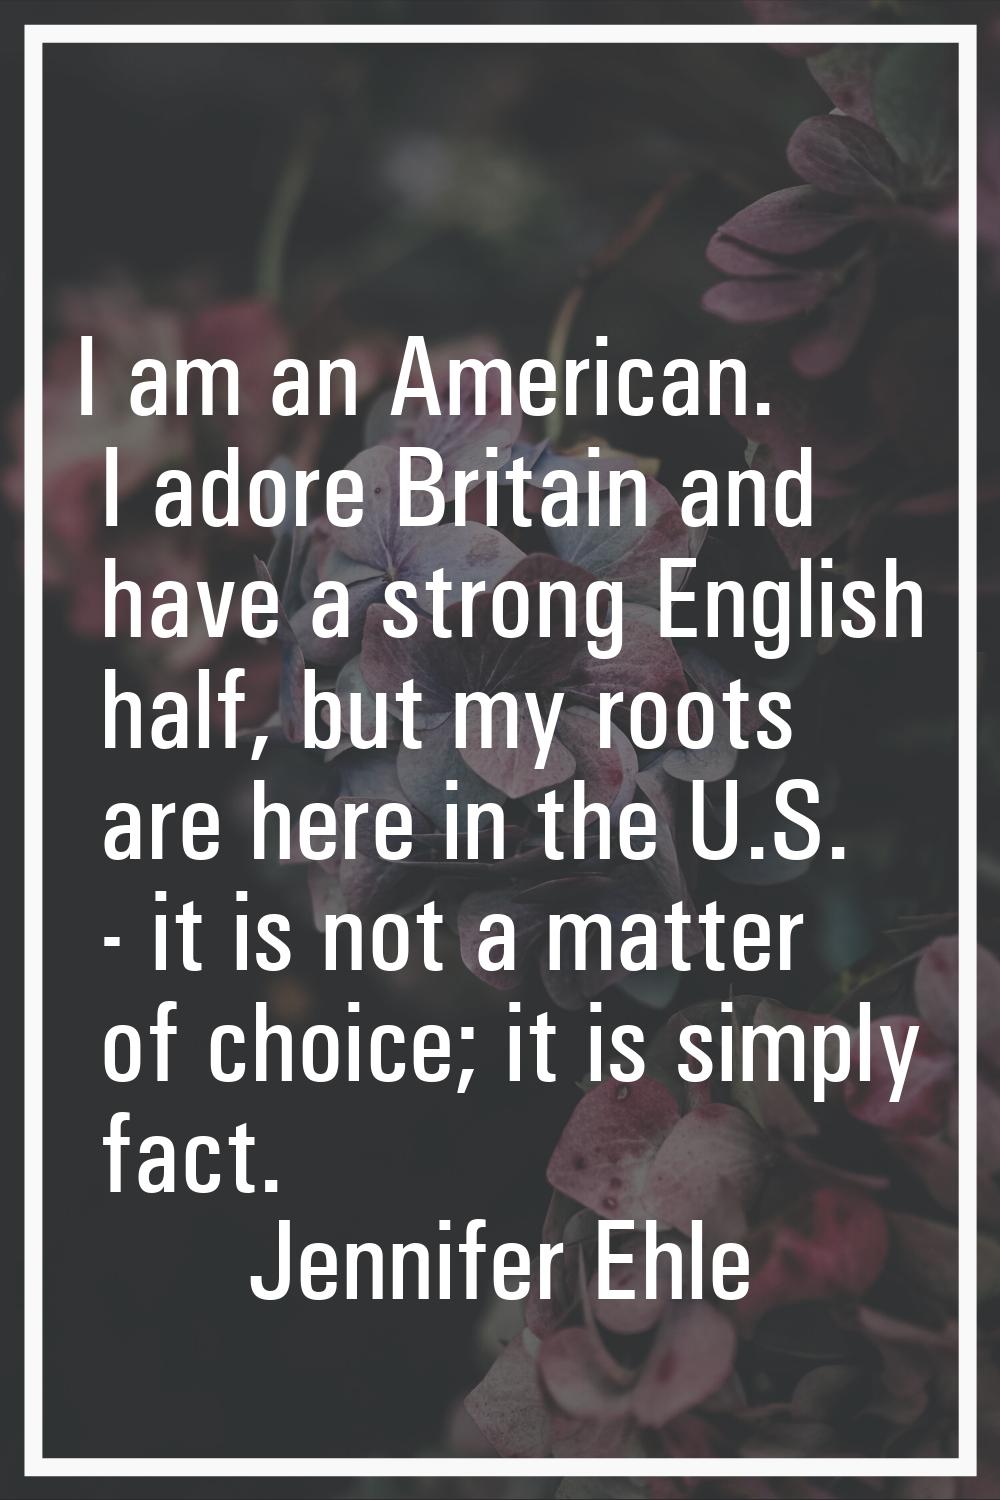 I am an American. I adore Britain and have a strong English half, but my roots are here in the U.S.